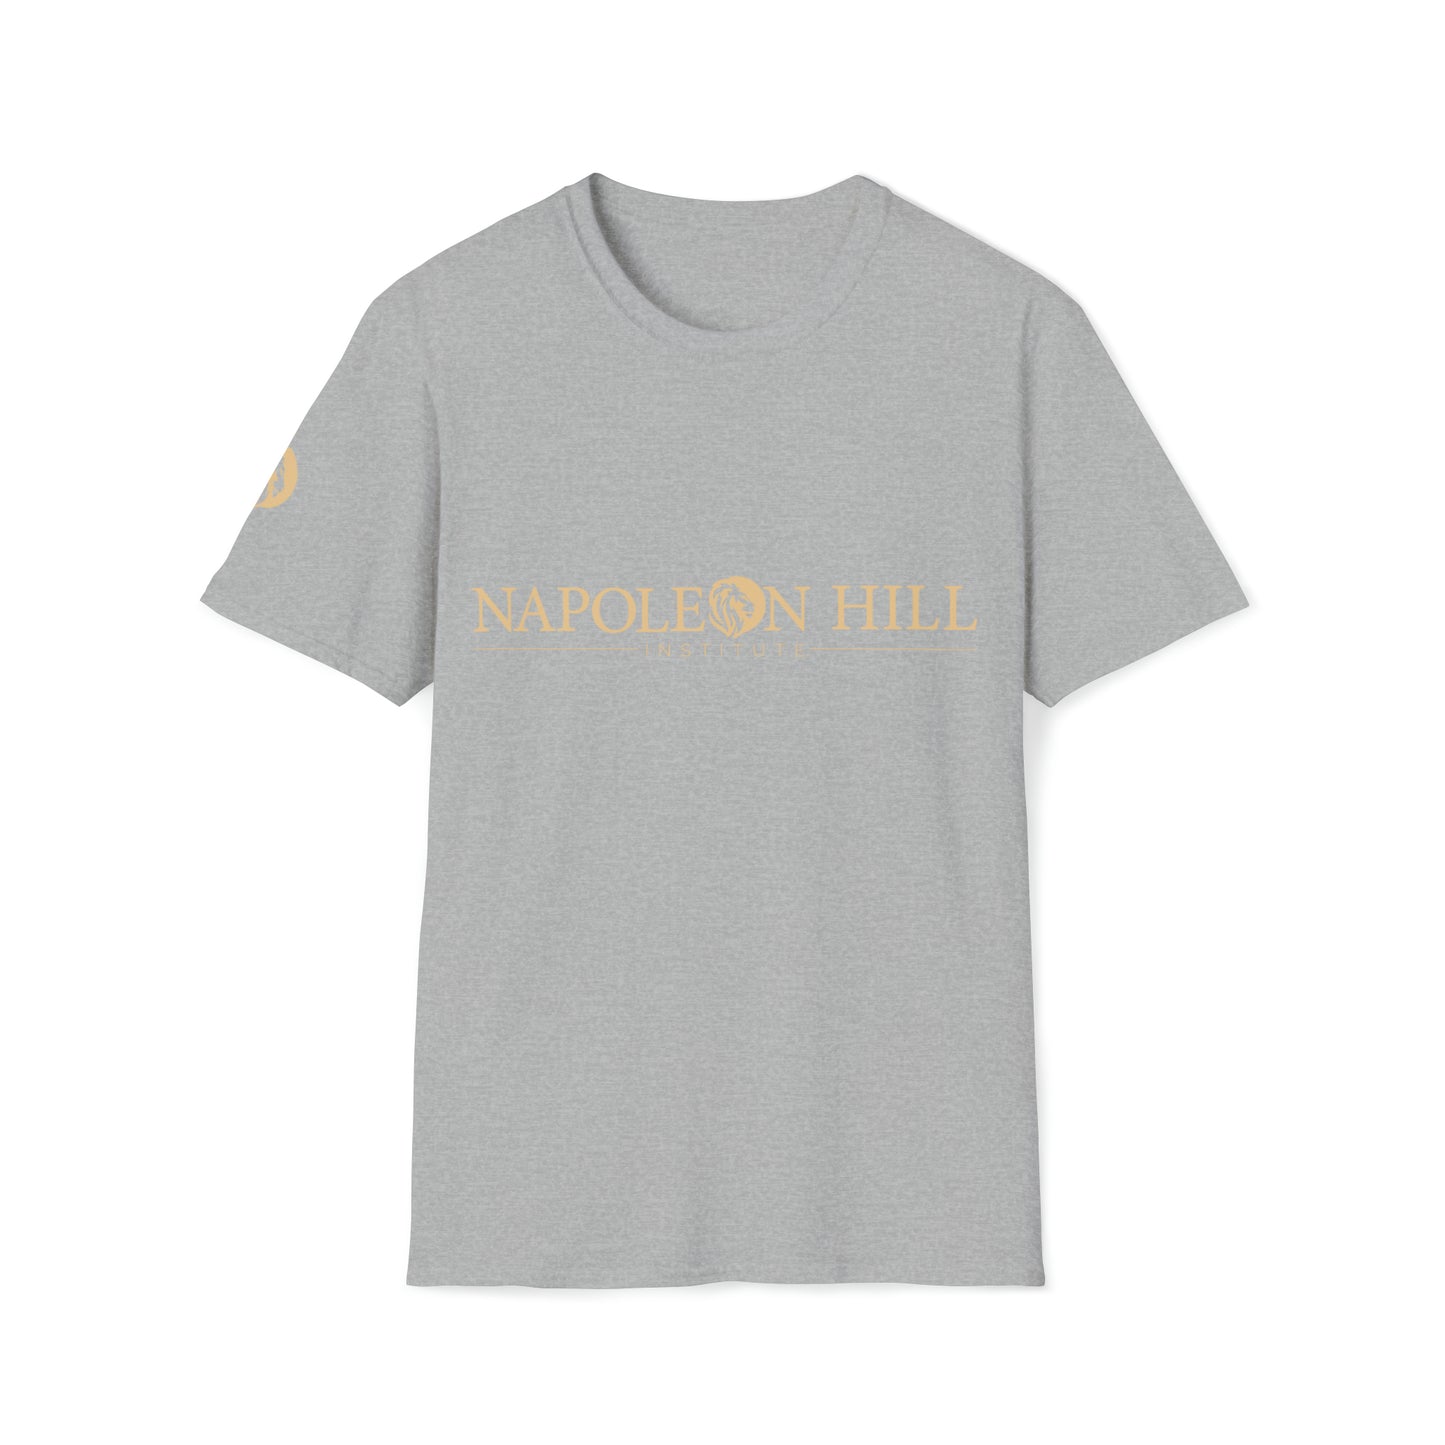 Napoleon Hill Institute T-shirt for Men (Europe shipping)